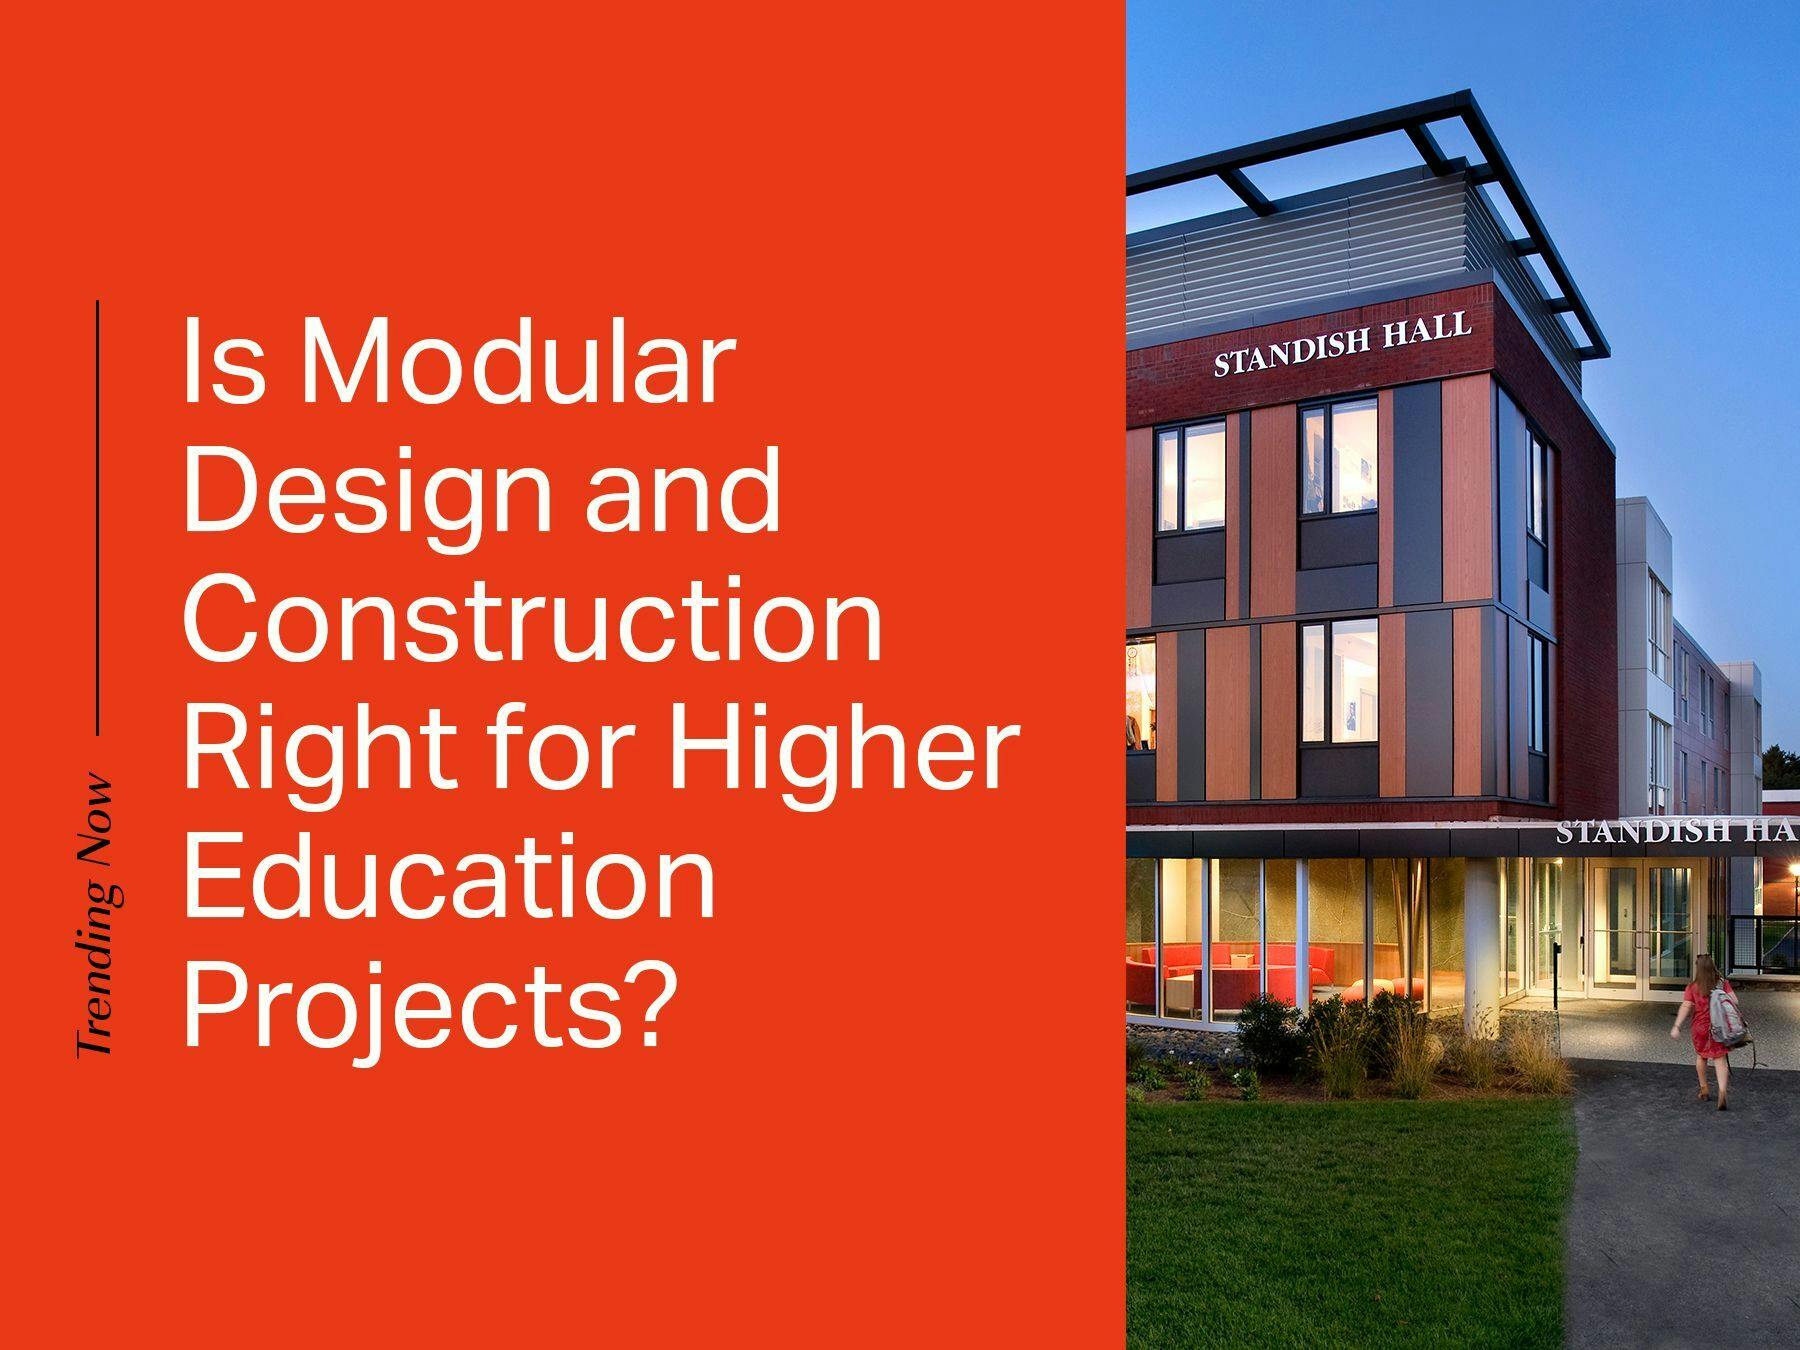 Is Modular Design and Construction Right for Higher Education Projects?